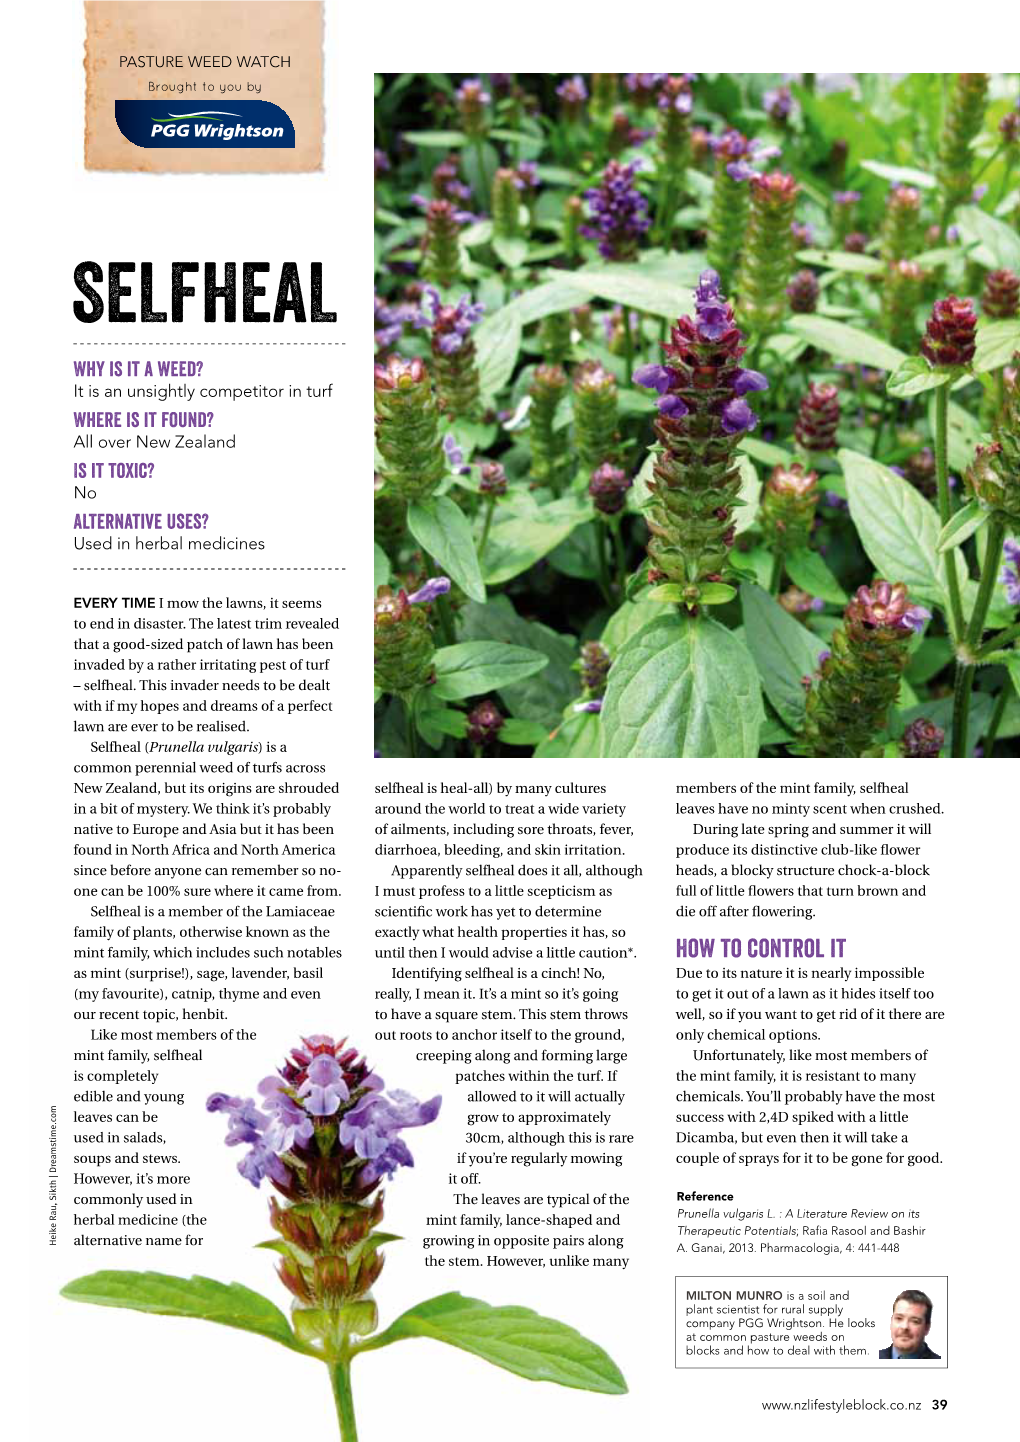 SELFHEAL Why Is It a Weed? It Is an Unsightly Competitor in Turf Where Is It Found? All Over New Zealand Is It Toxic? No Alternative Uses? Used in Herbal Medicines